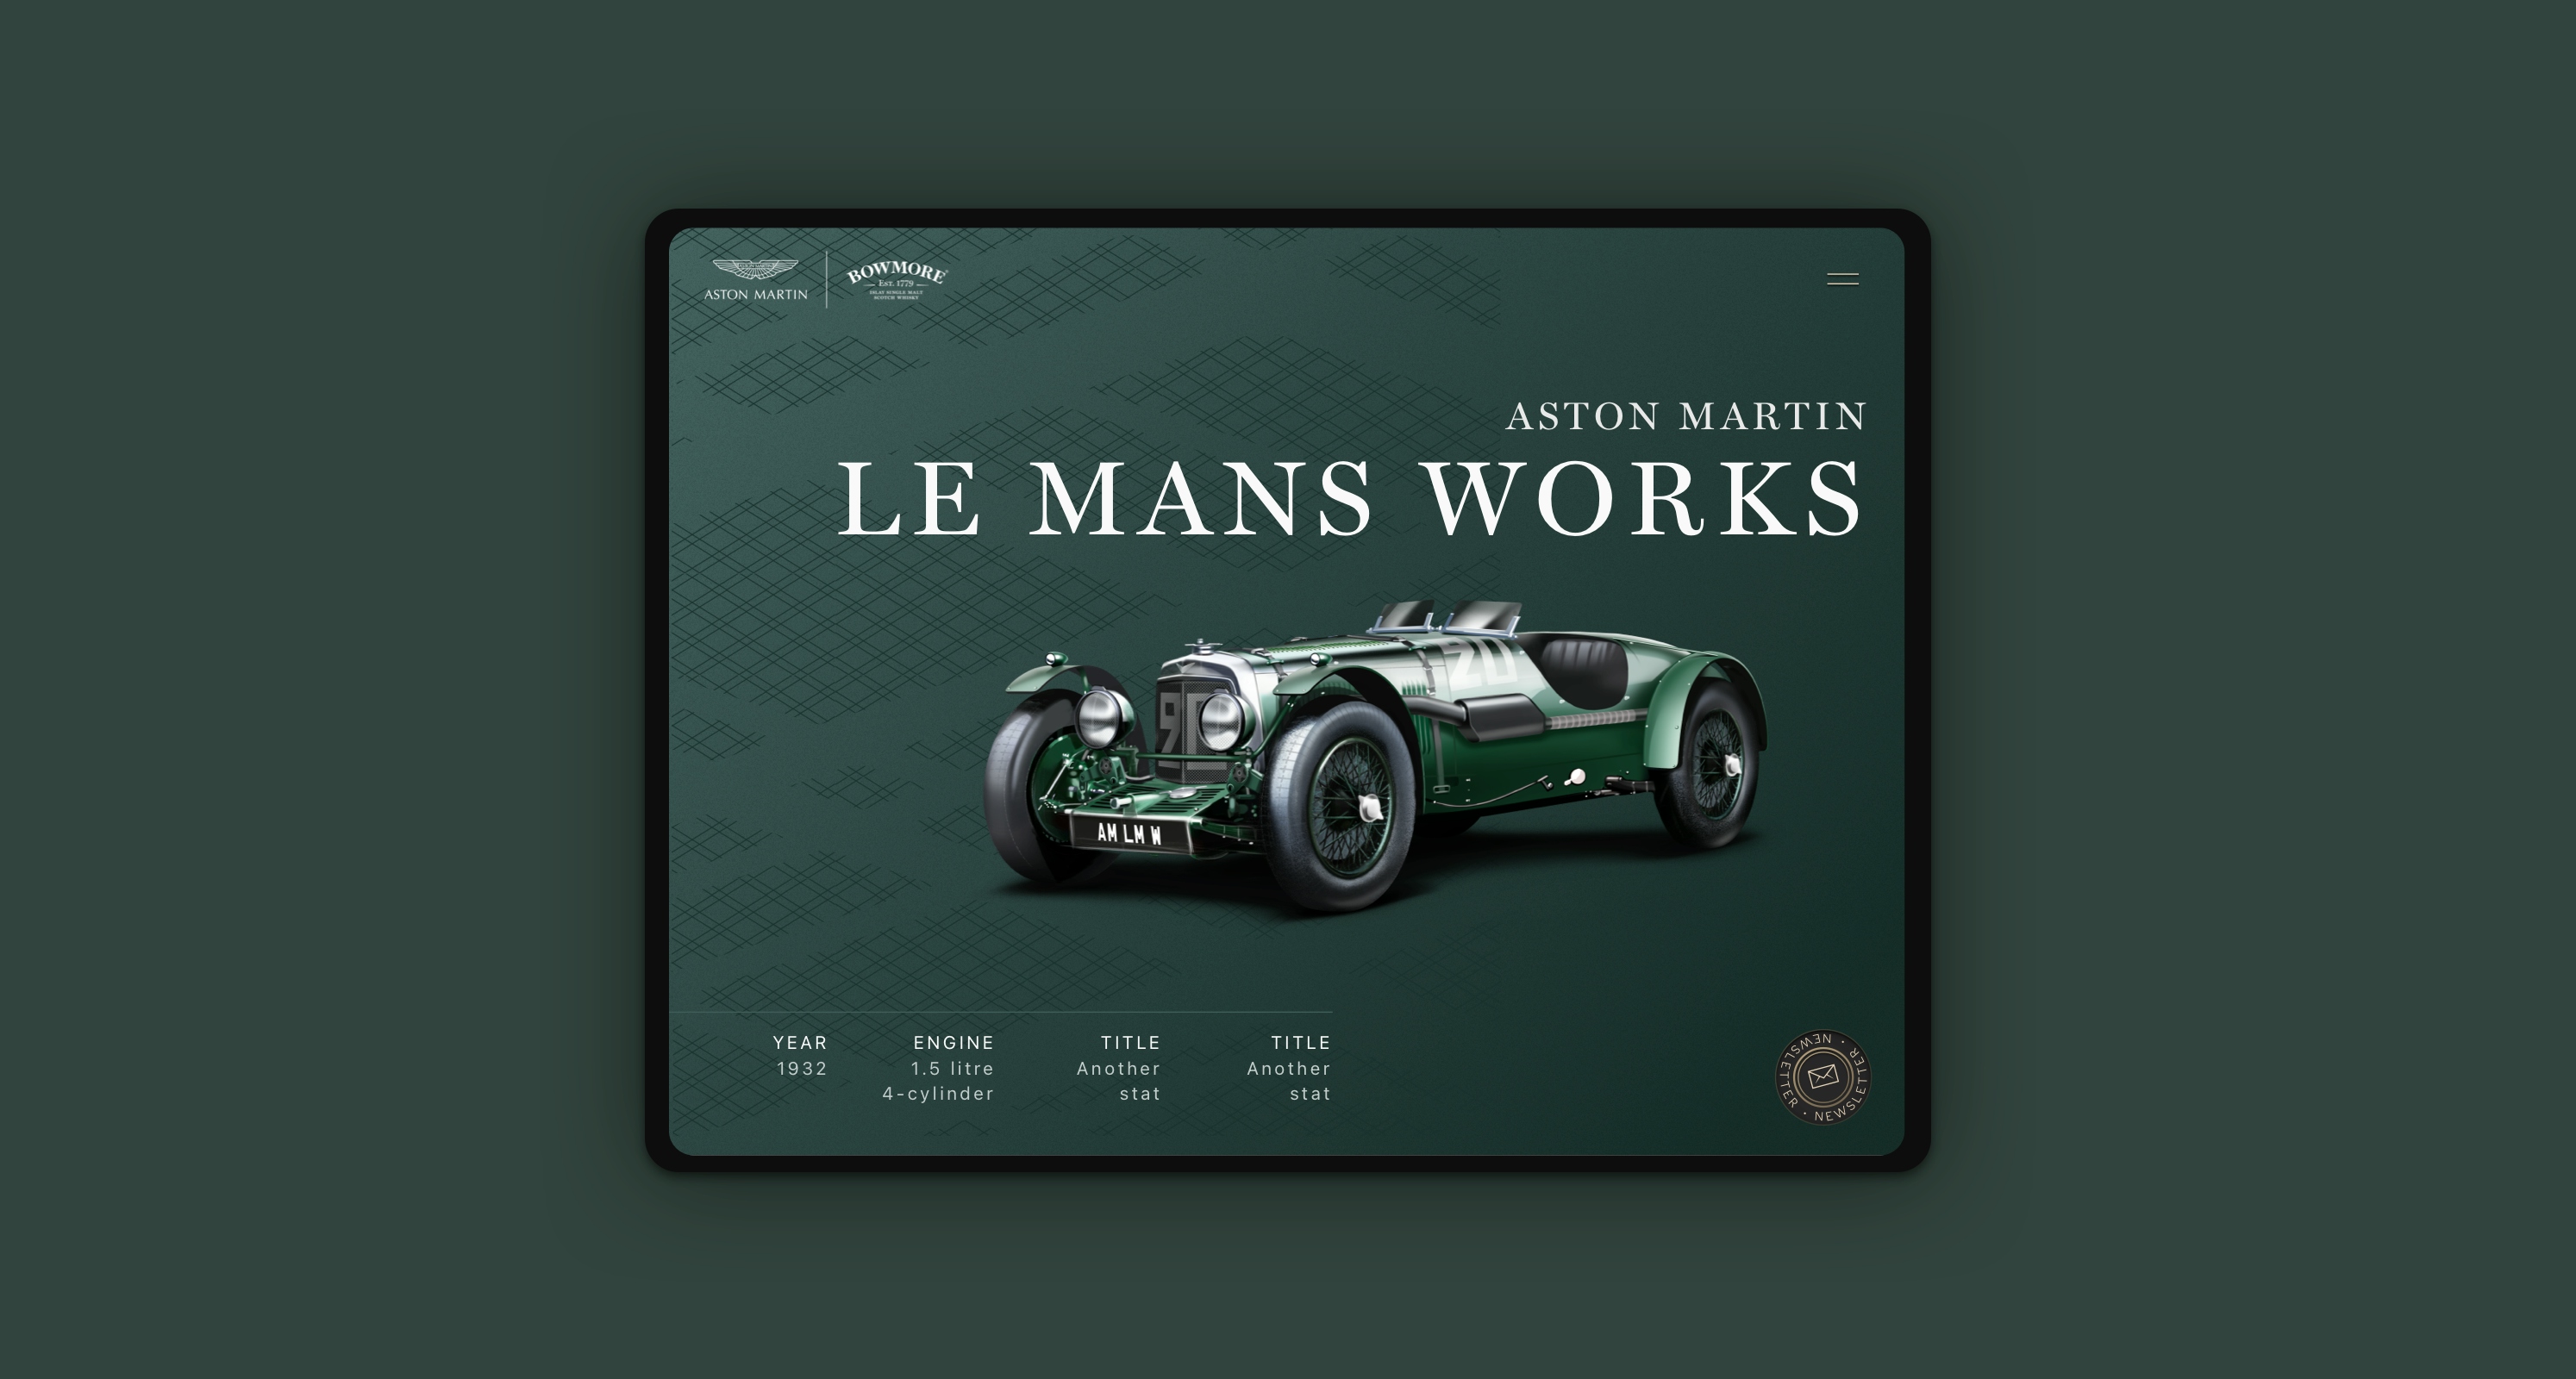 "Aston Martin Le mans work" classic 1932 model of car is shown to display digital image created by More Yum